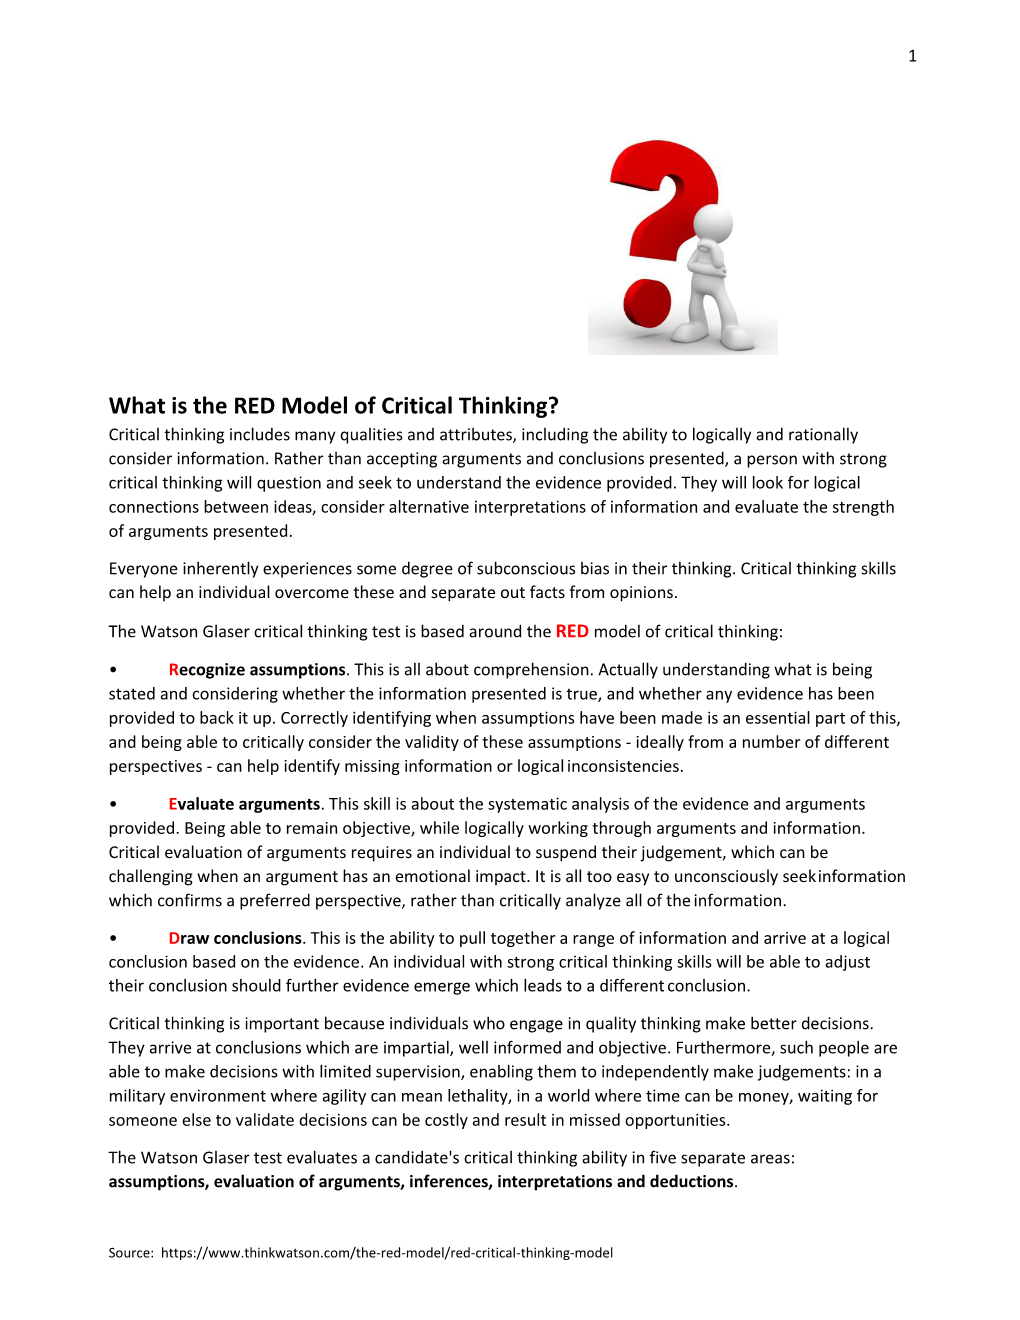 What Is the RED Model of Critical Thinking?